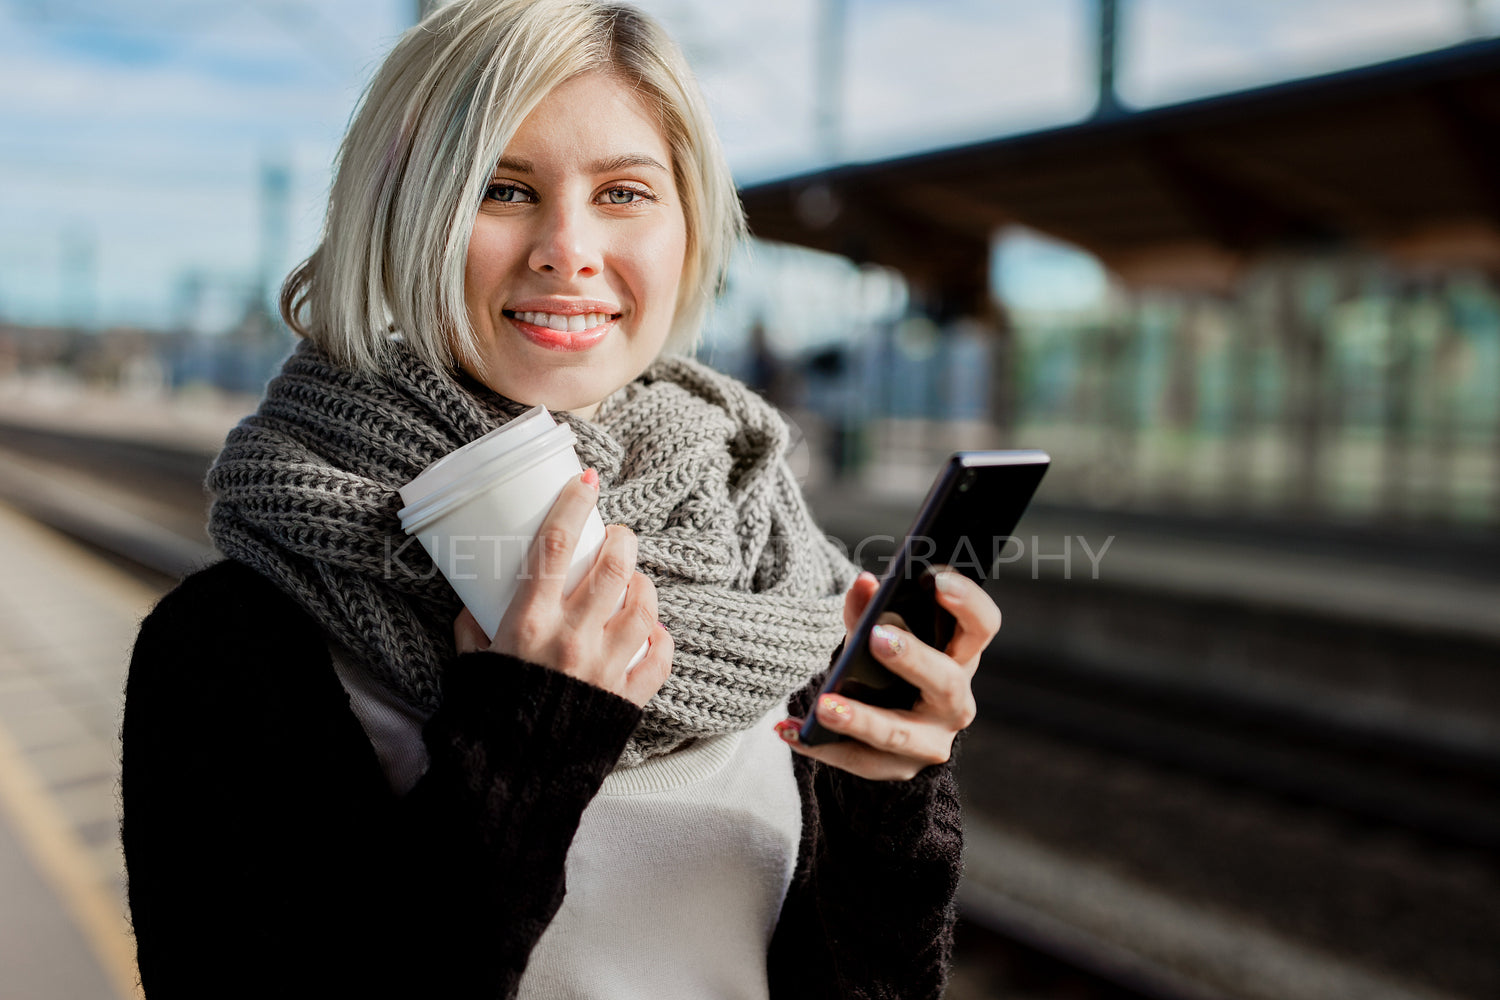 Woman Holding Coffee Cup And Mobile Phone At Train Station